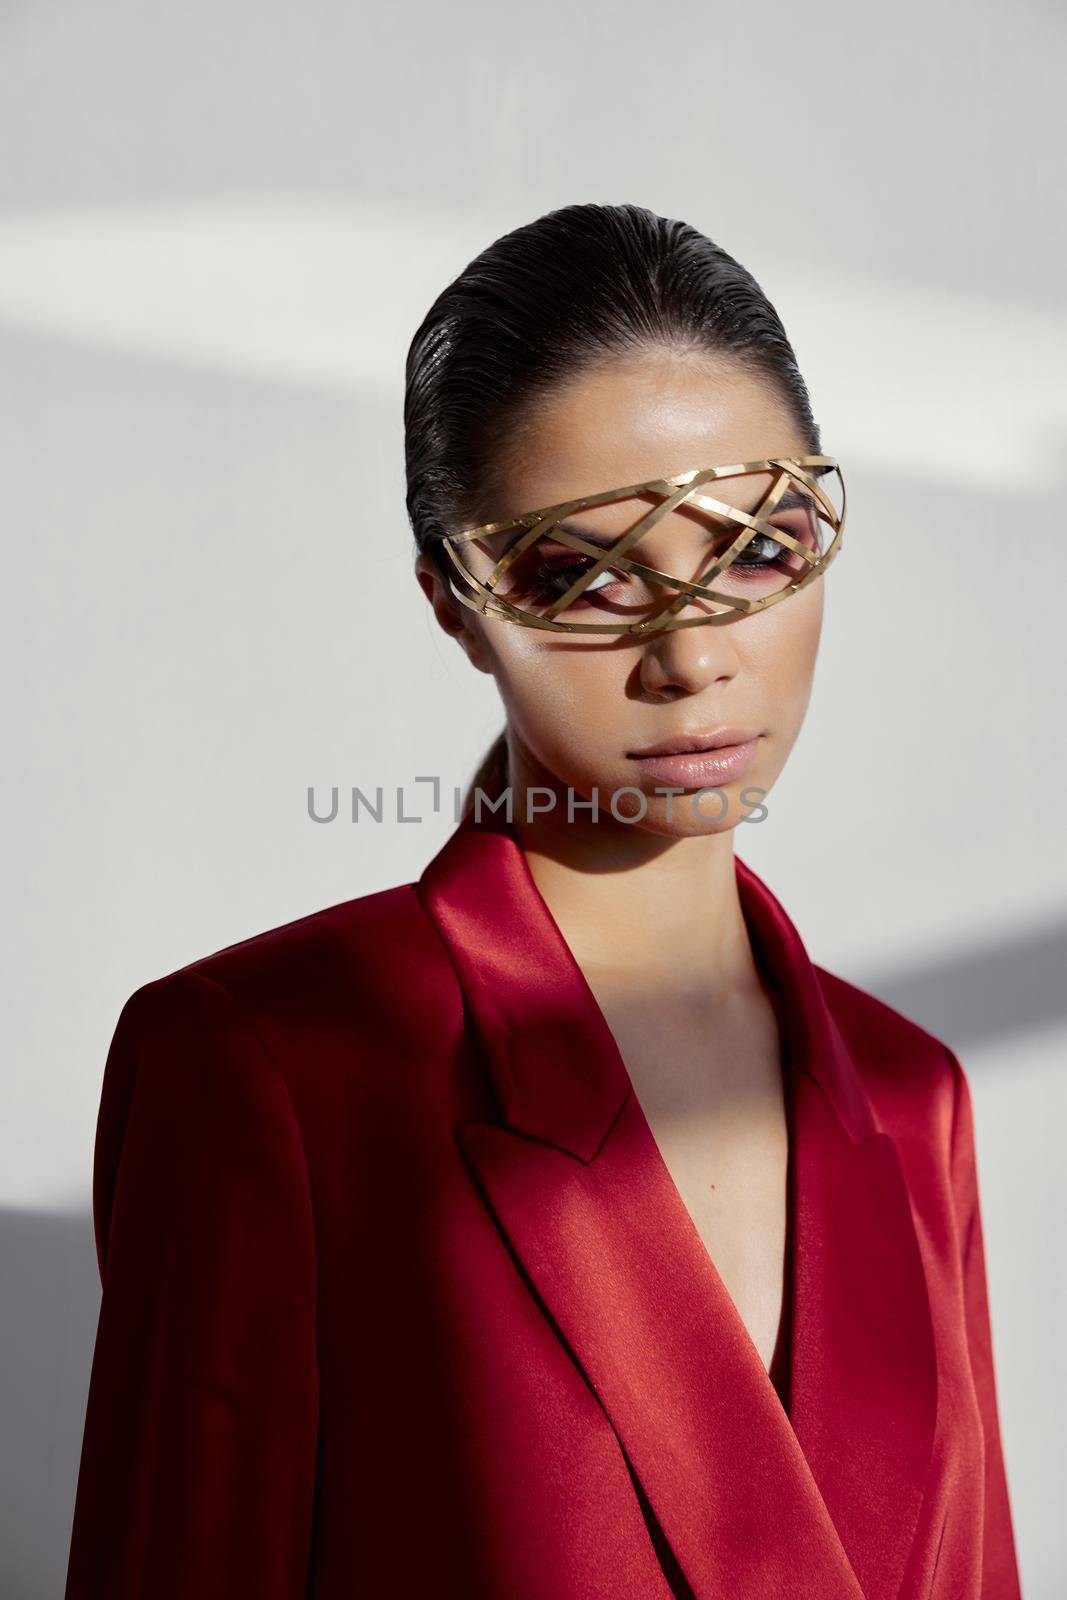 model in red blazer with accessory on face cropped view. High quality photo